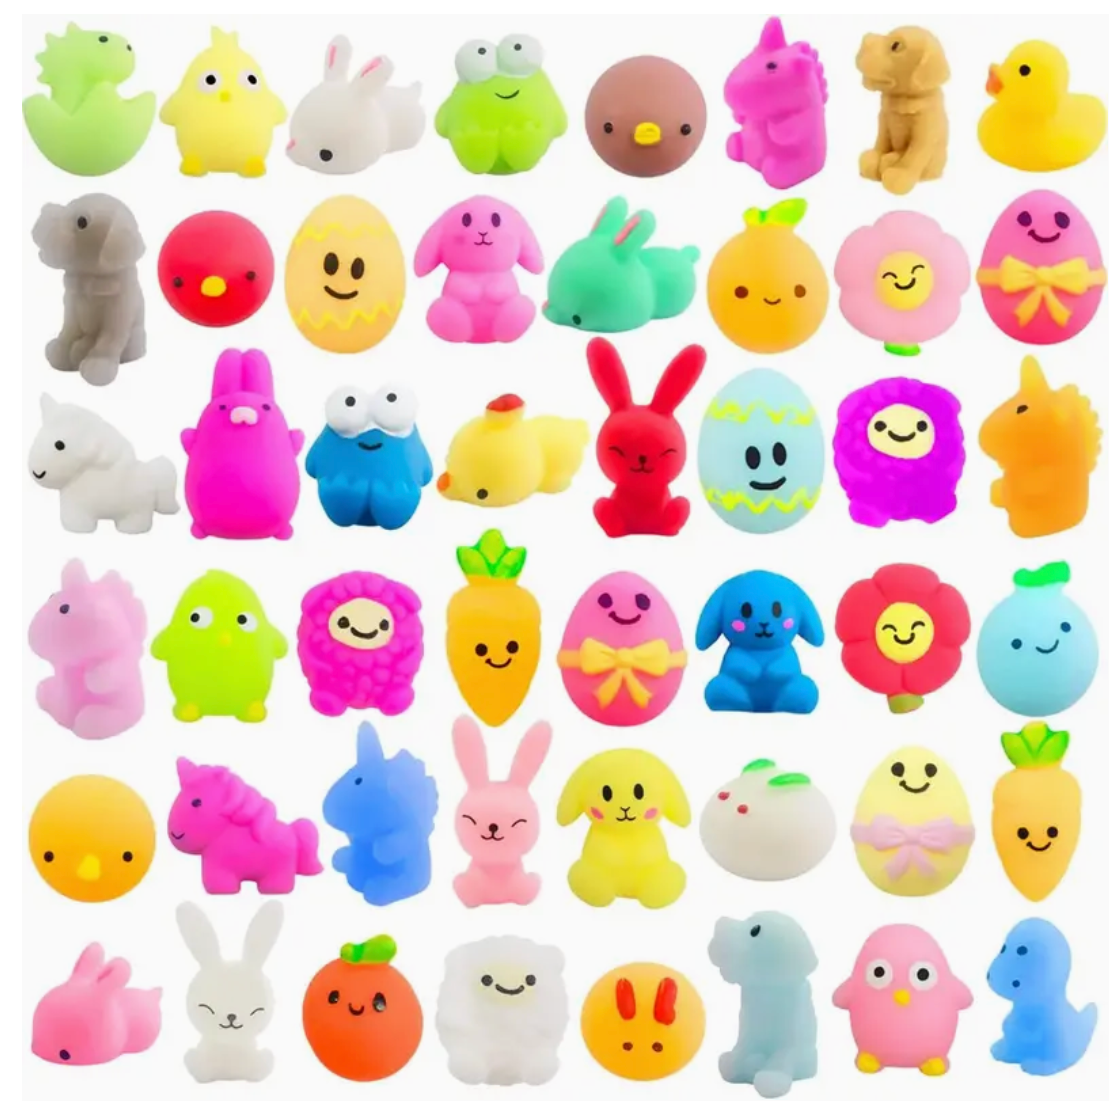 Variety of Easter toys that could come inside the bath bombs for kids.